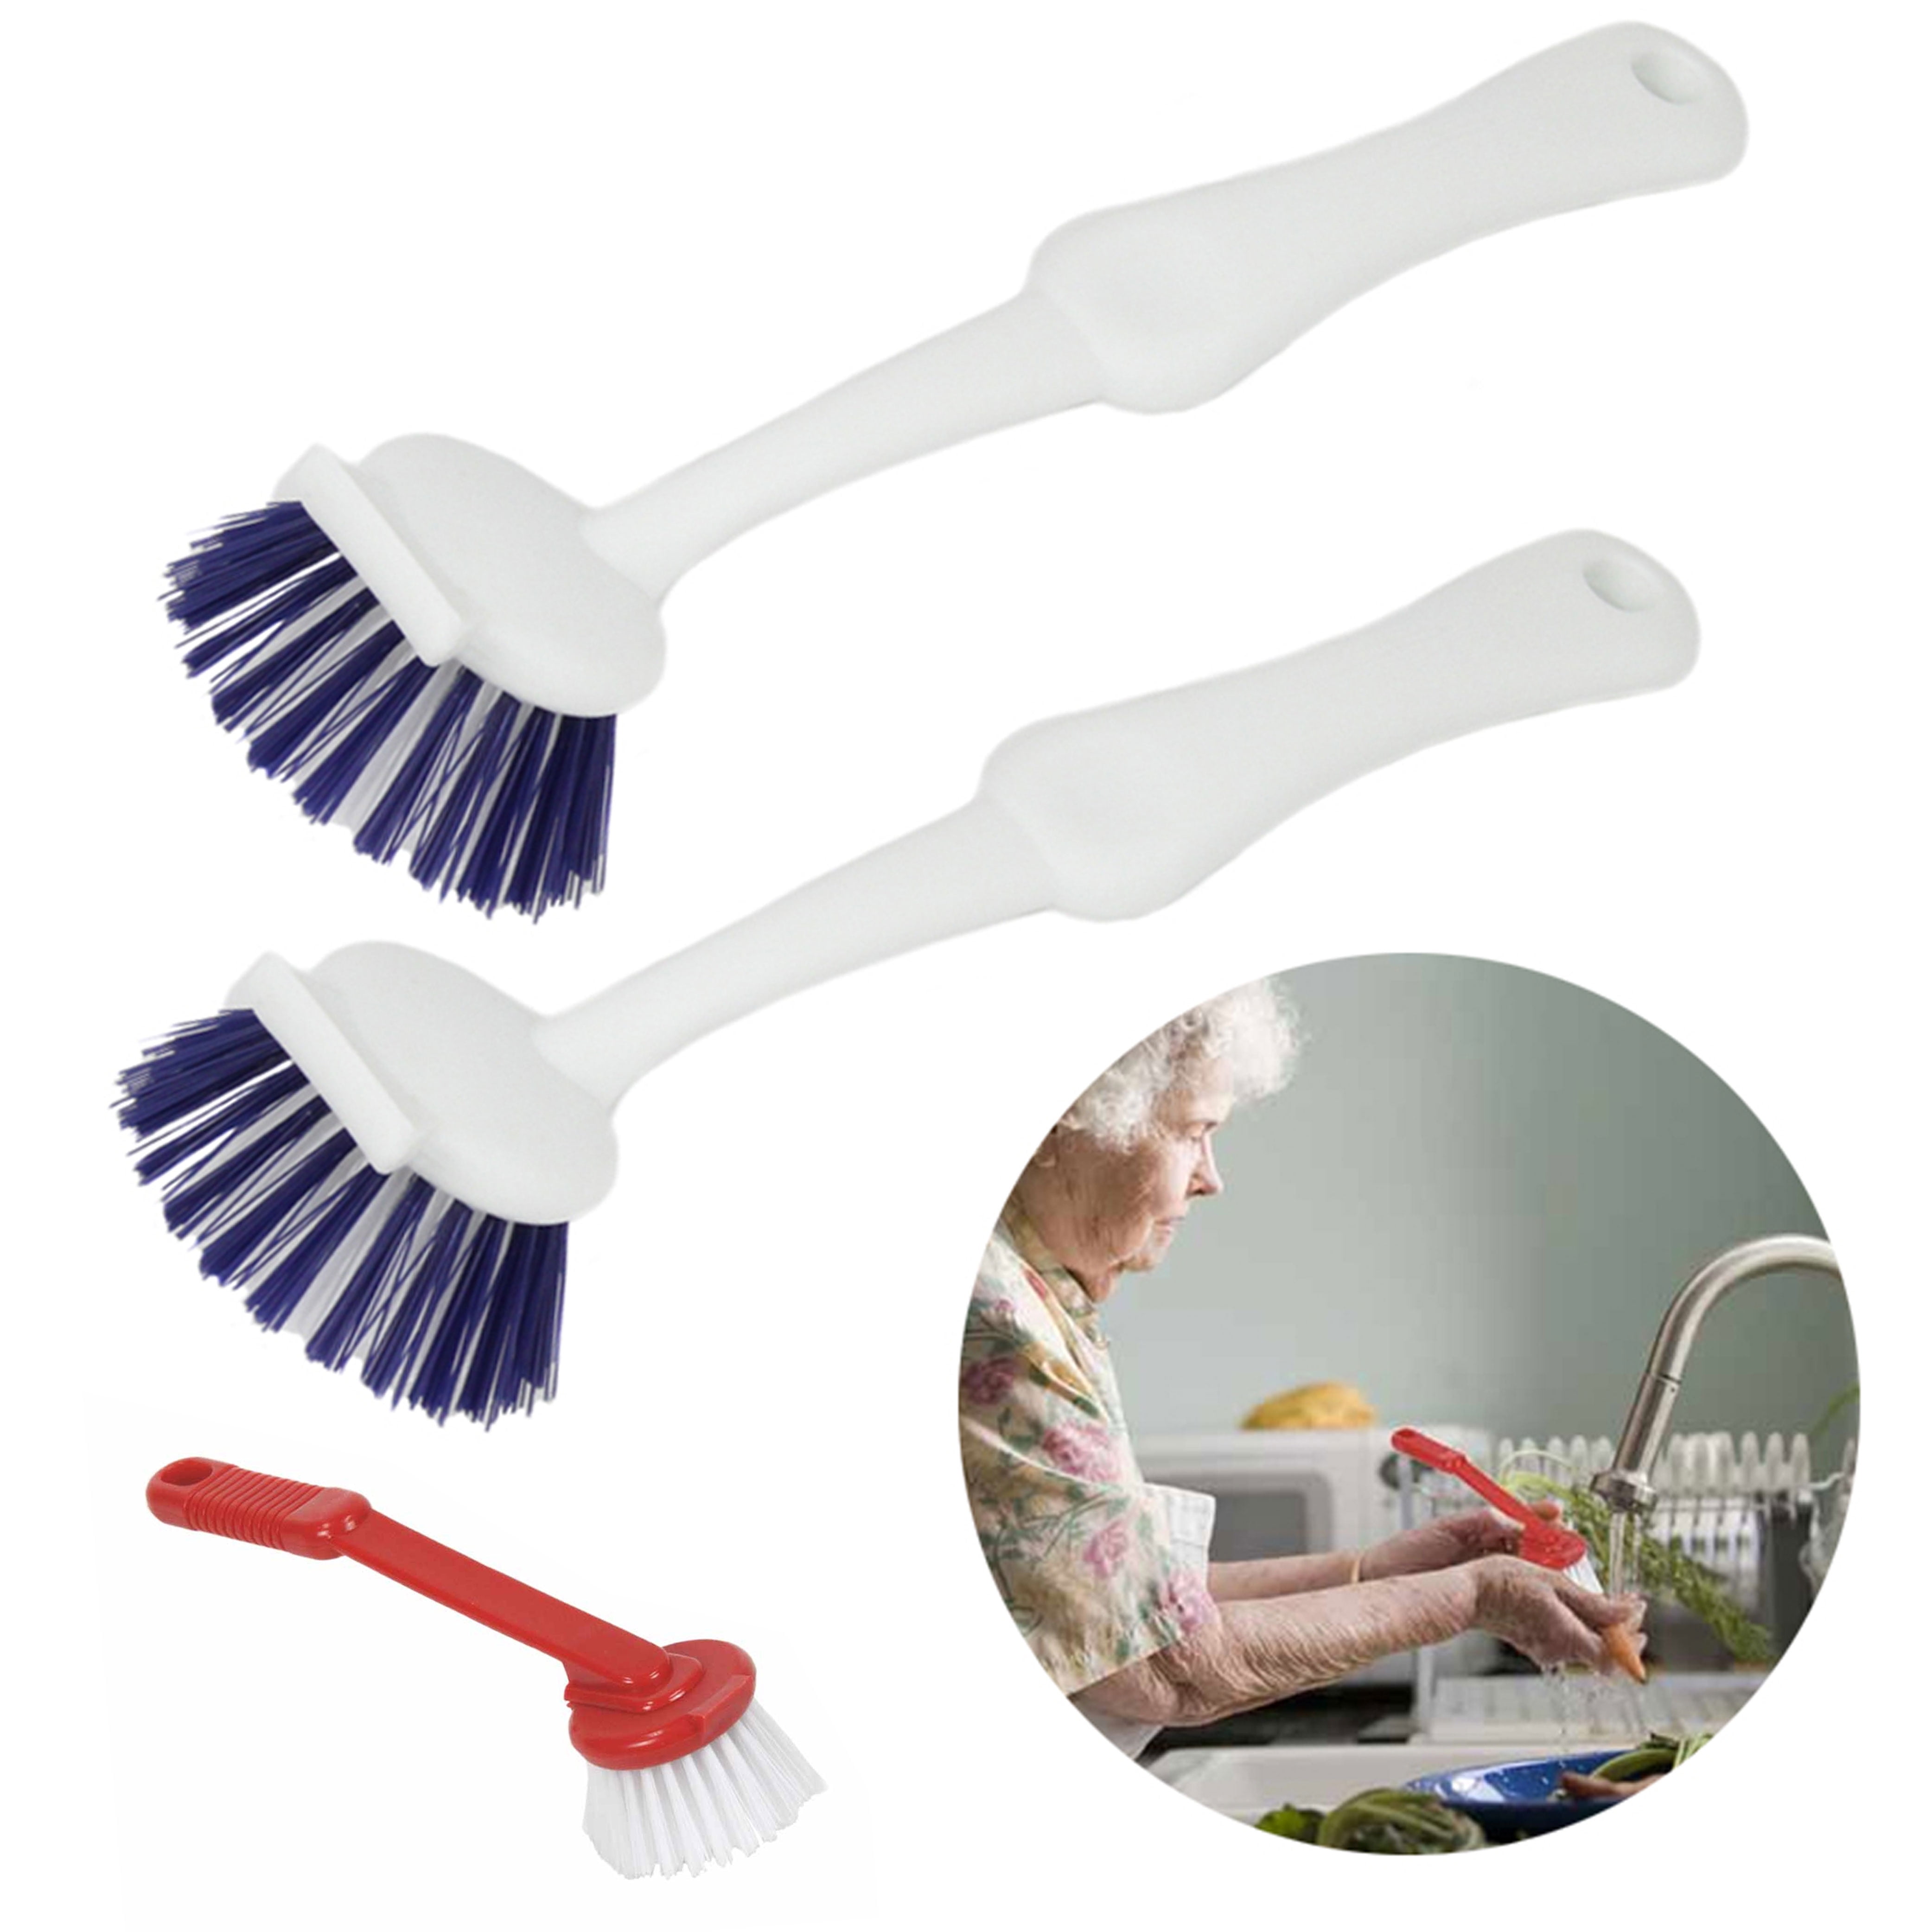 2Pcs Cleaning Brushes, Multi-Purpose Right Angle Brush Scrubbing Kitchen  Bathroom Deep Cleaning Edge Corner Crevices Grout Scrub Dish Pot Sink